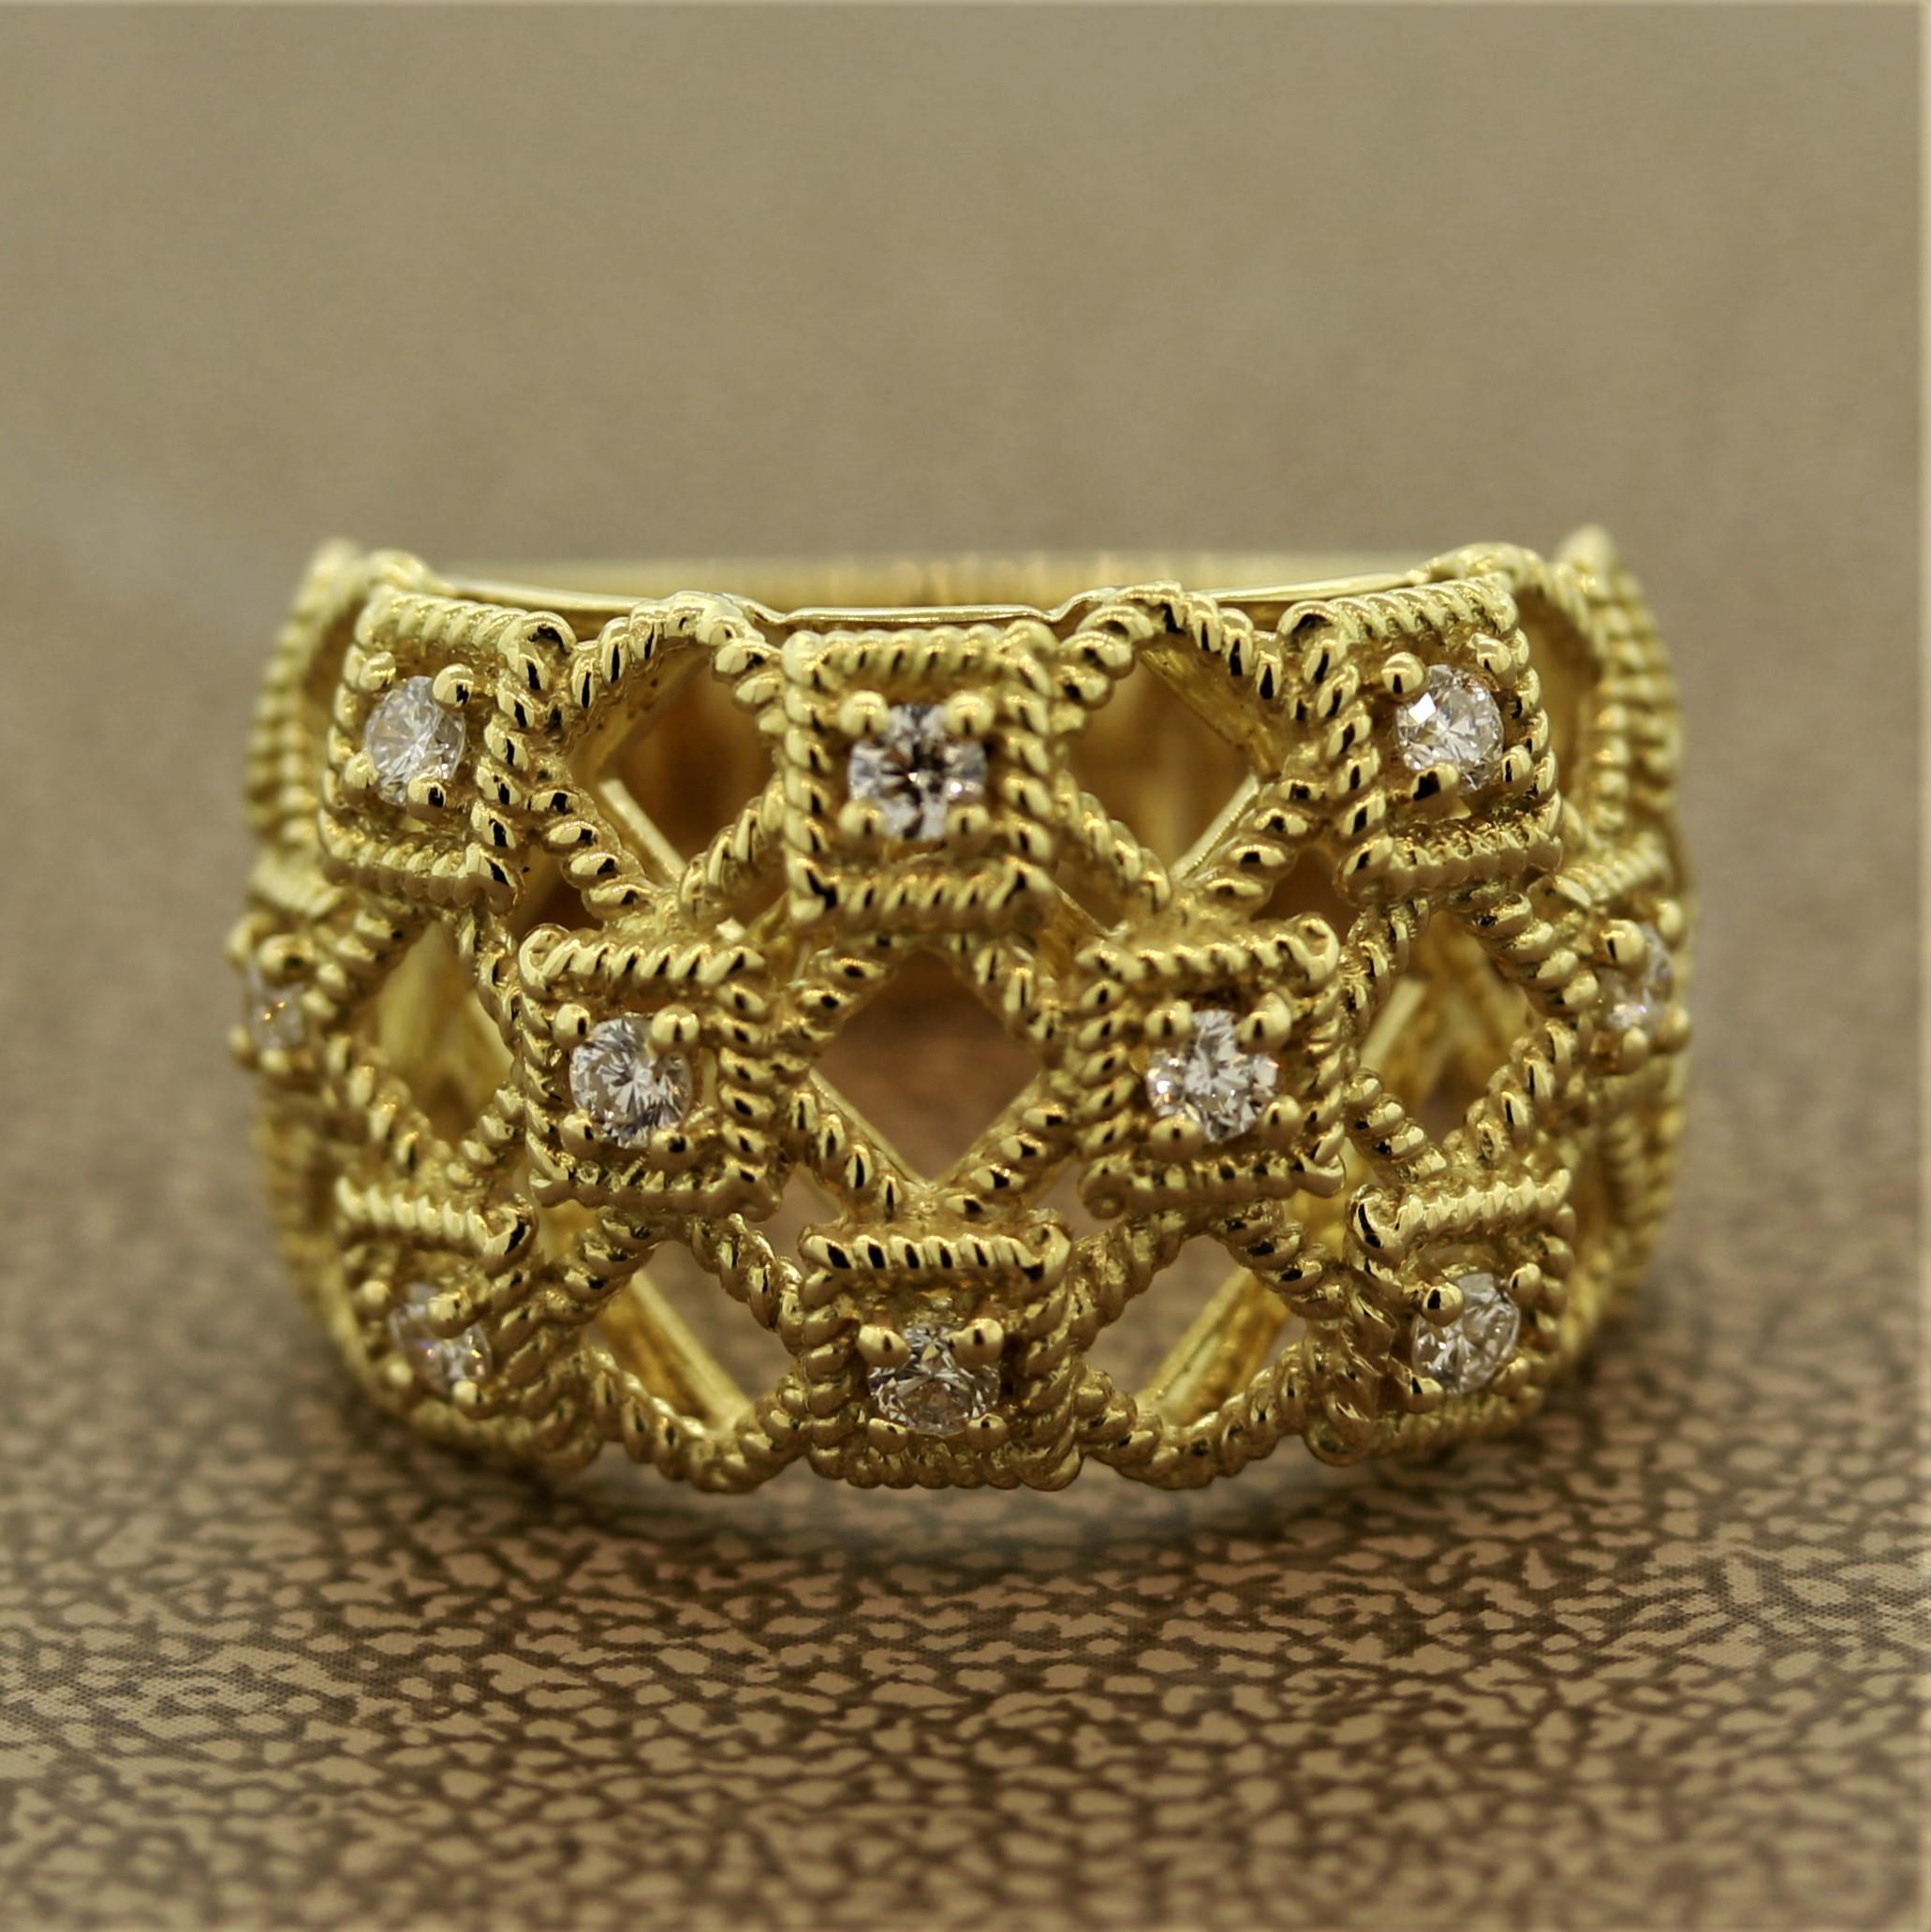 A unique Italian made piece featuring 10 round brilliant cut diamonds weighing a total of 0.38 carats. They are set in 18k yellow gold squares and separated by alternating geometric squares making a stylish pattern. Made in 18k yellow gold.

Ring